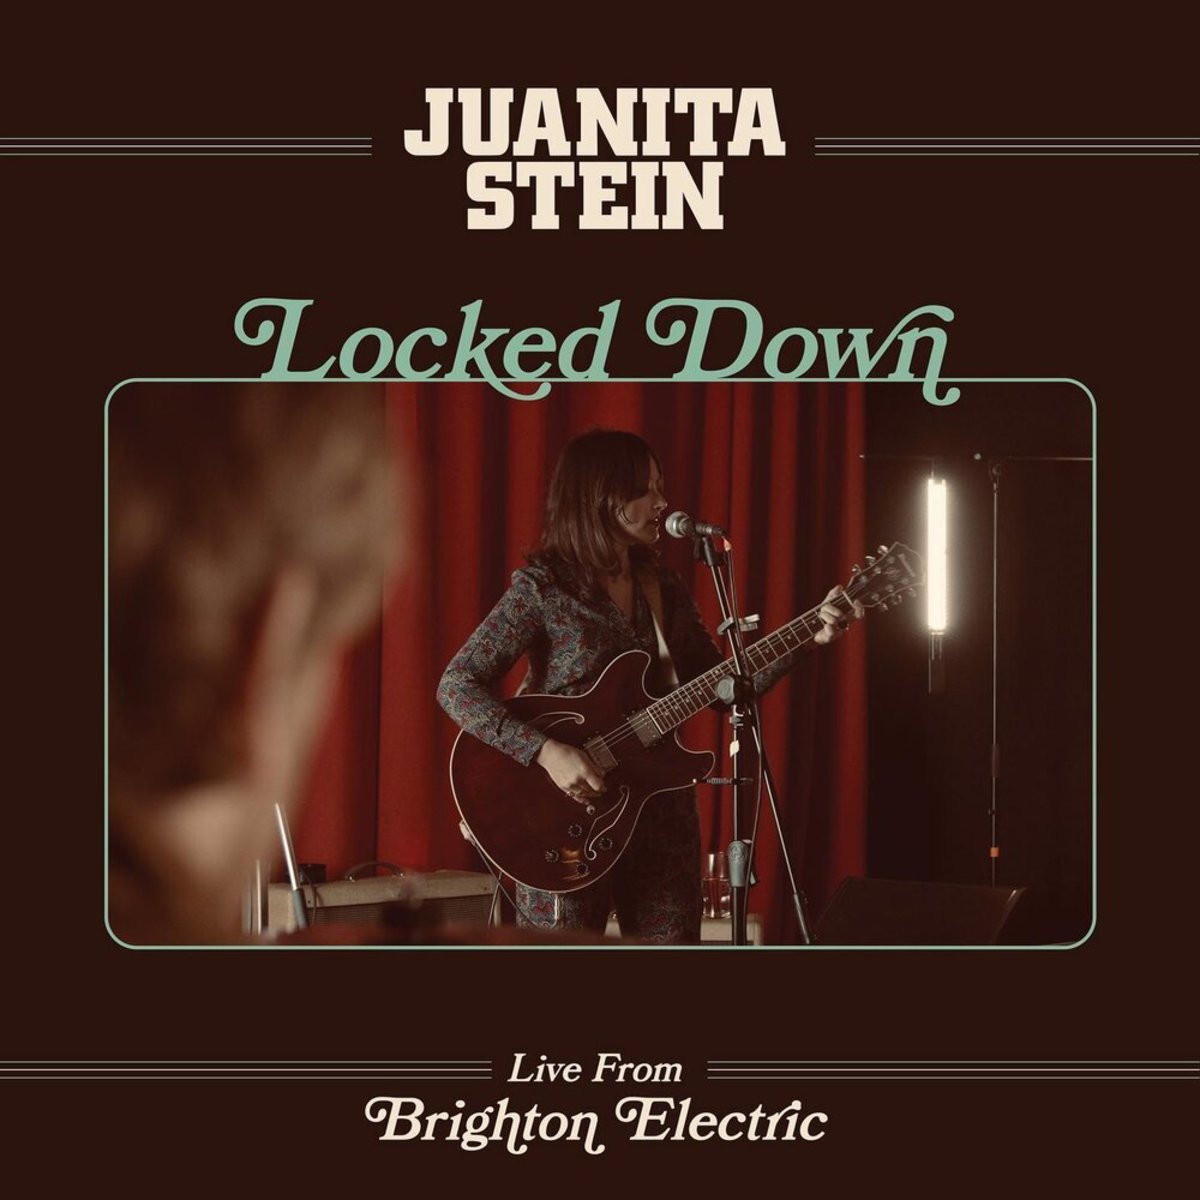 Locked Down – Live From Brighton Electric is Juanita Stein’s first live release.